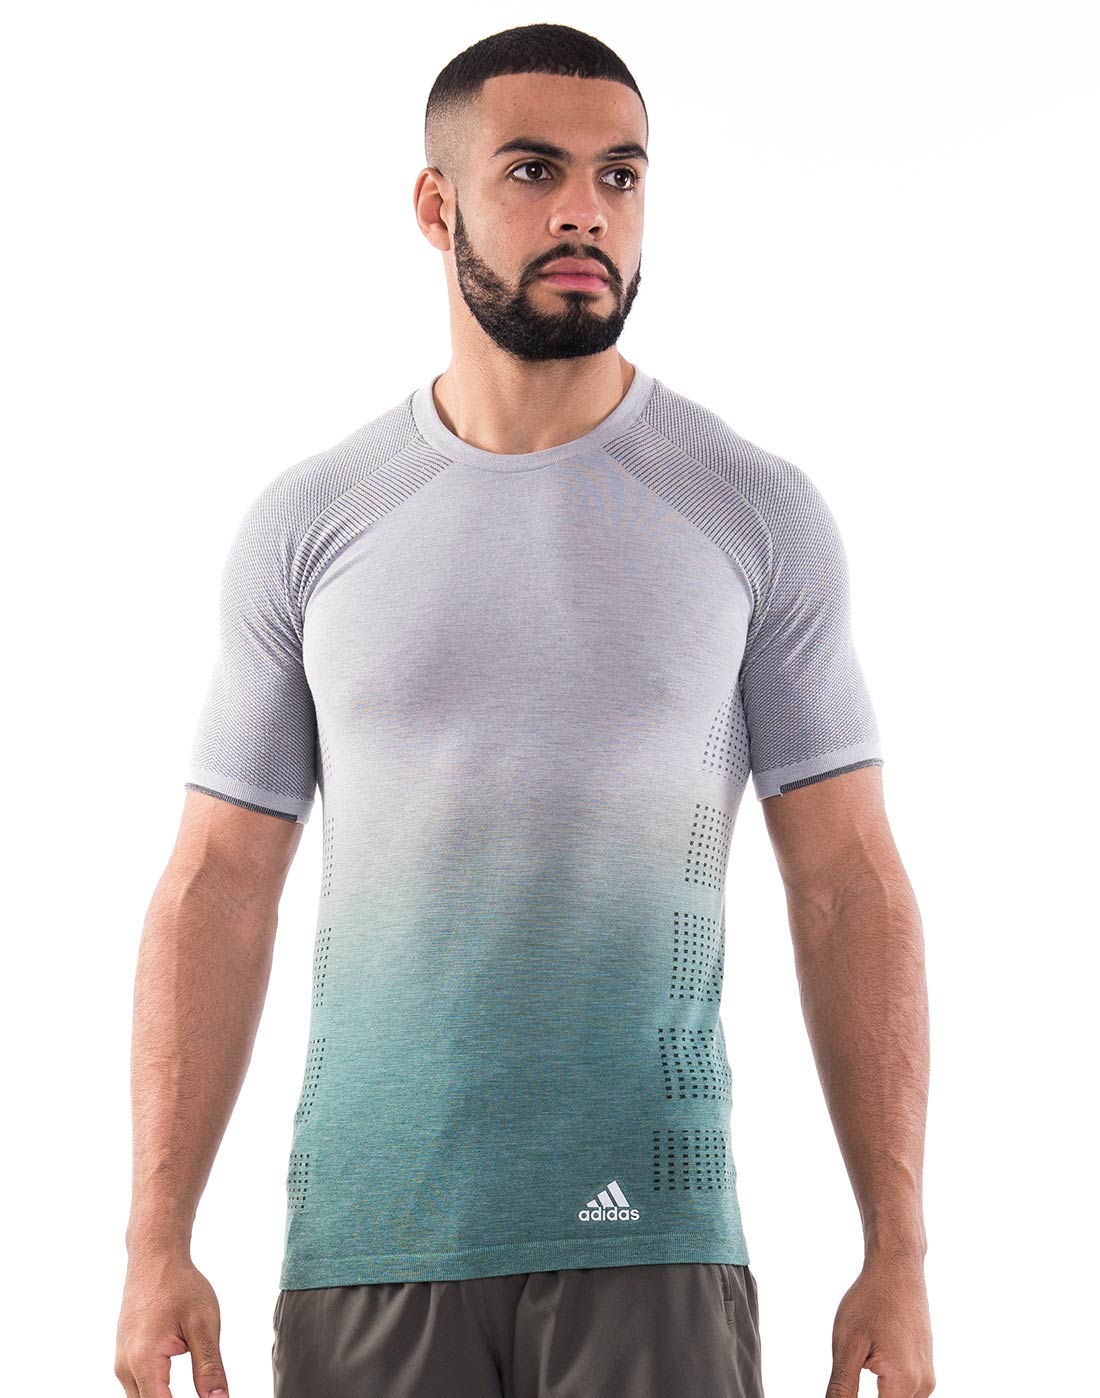 Adidas T Shirt Top Sellers, 48% - aveclumiere.com